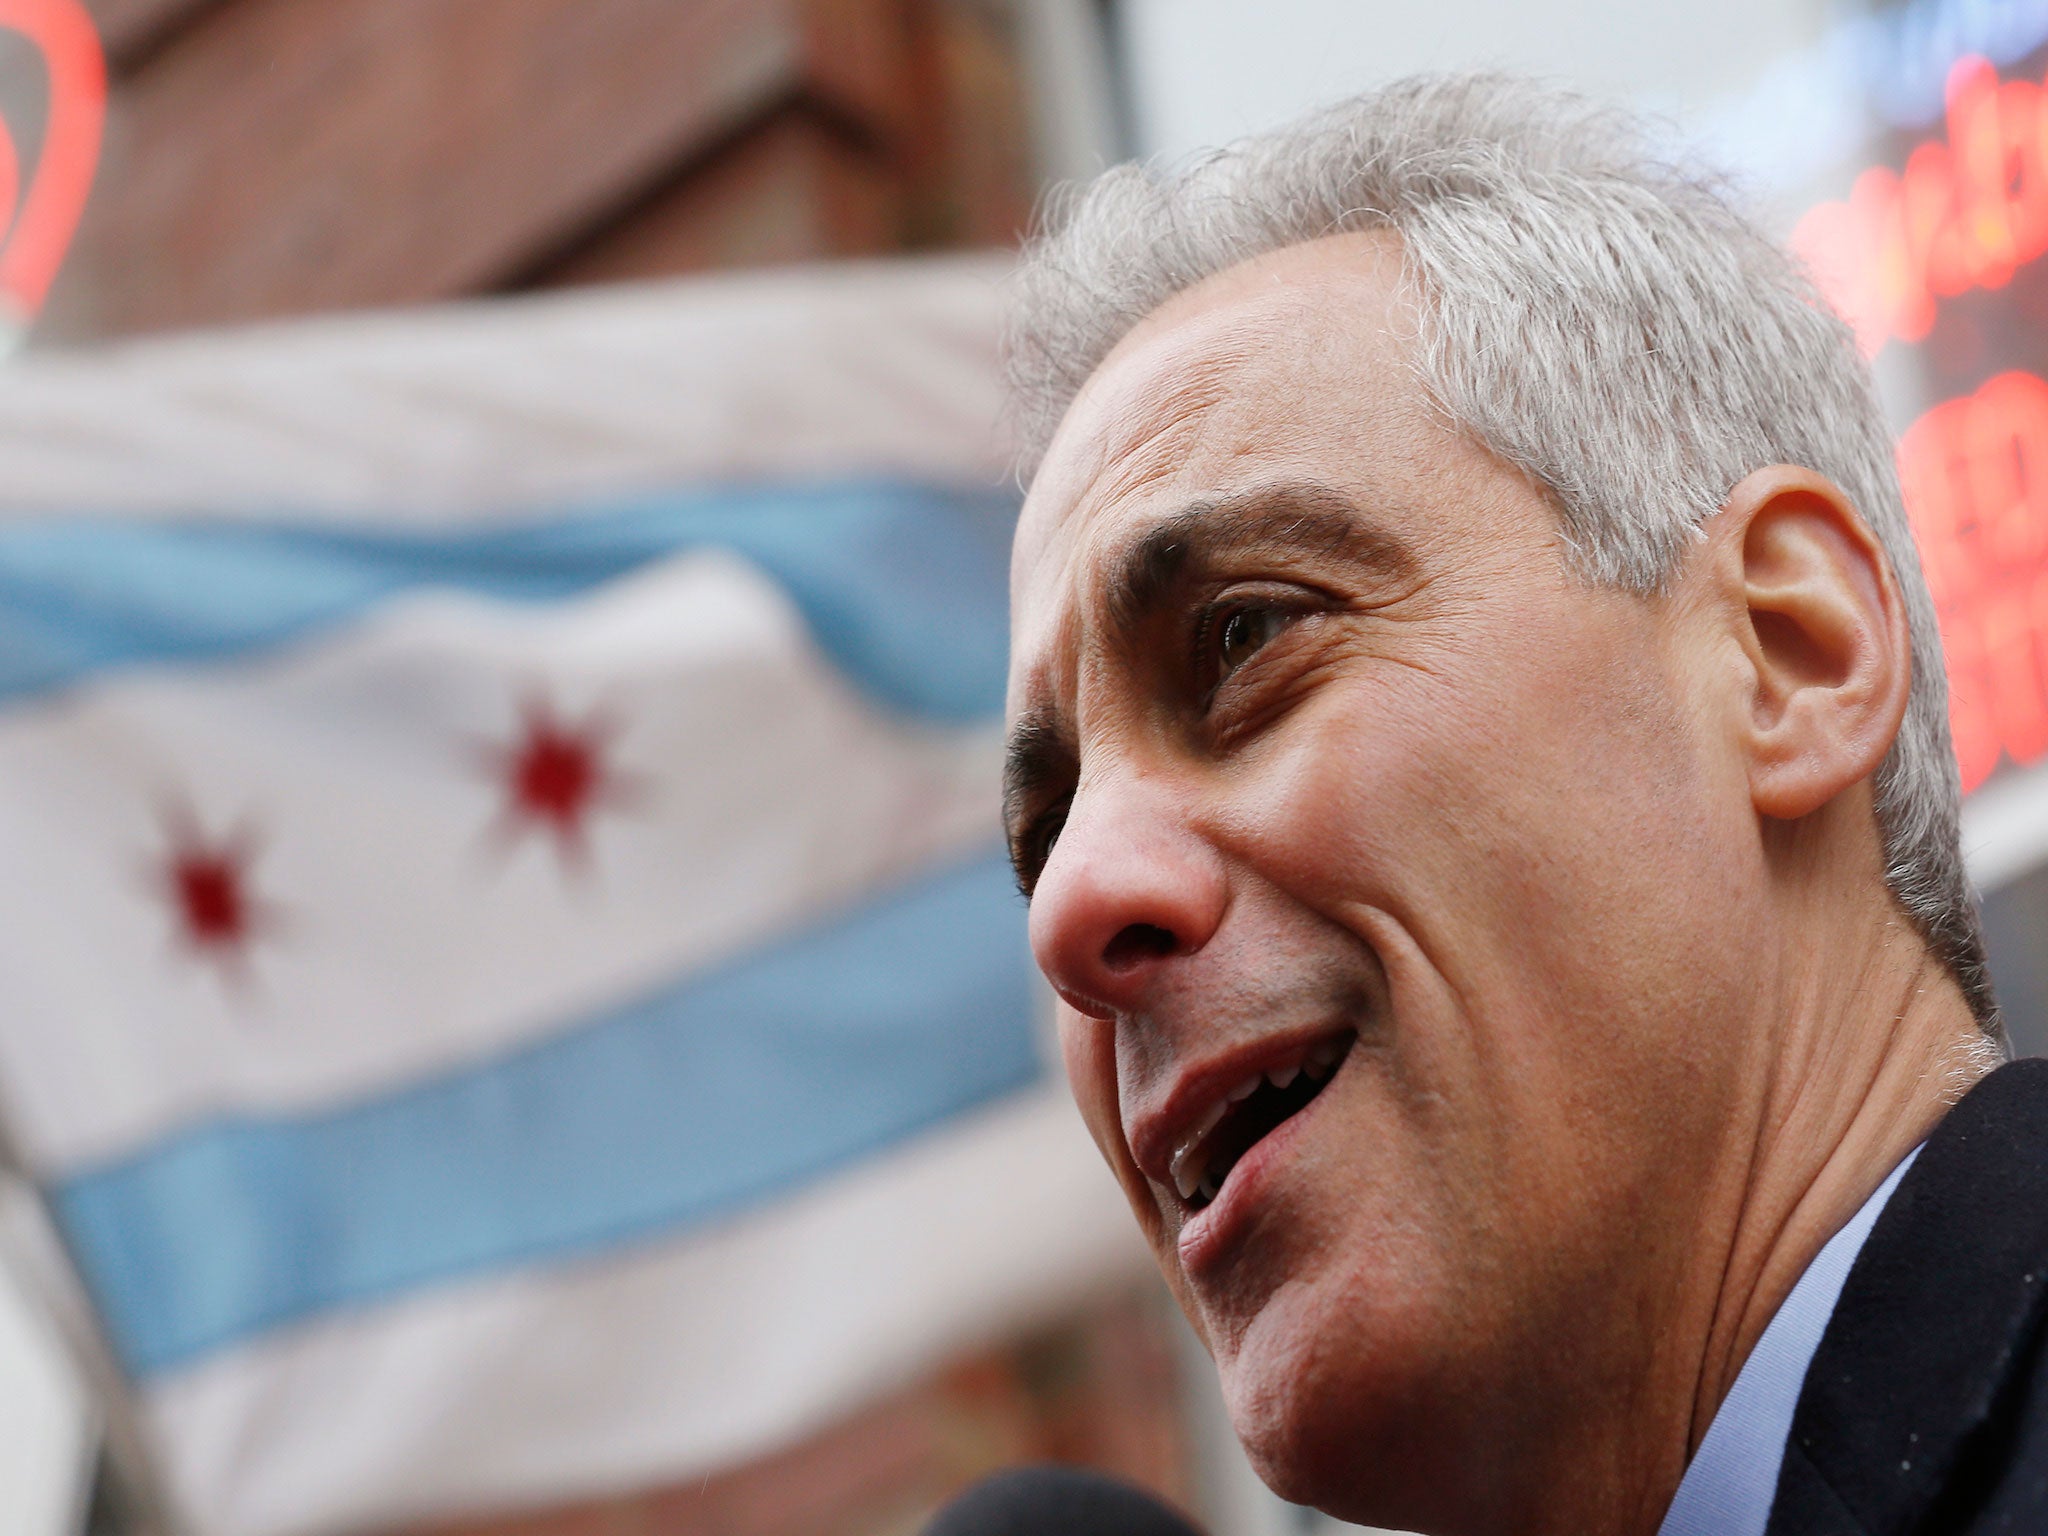 Chicago may be able to recall Emanuel. It could then tell the Democrats to go to hell and take the Republican Party back from the morons who run it today.